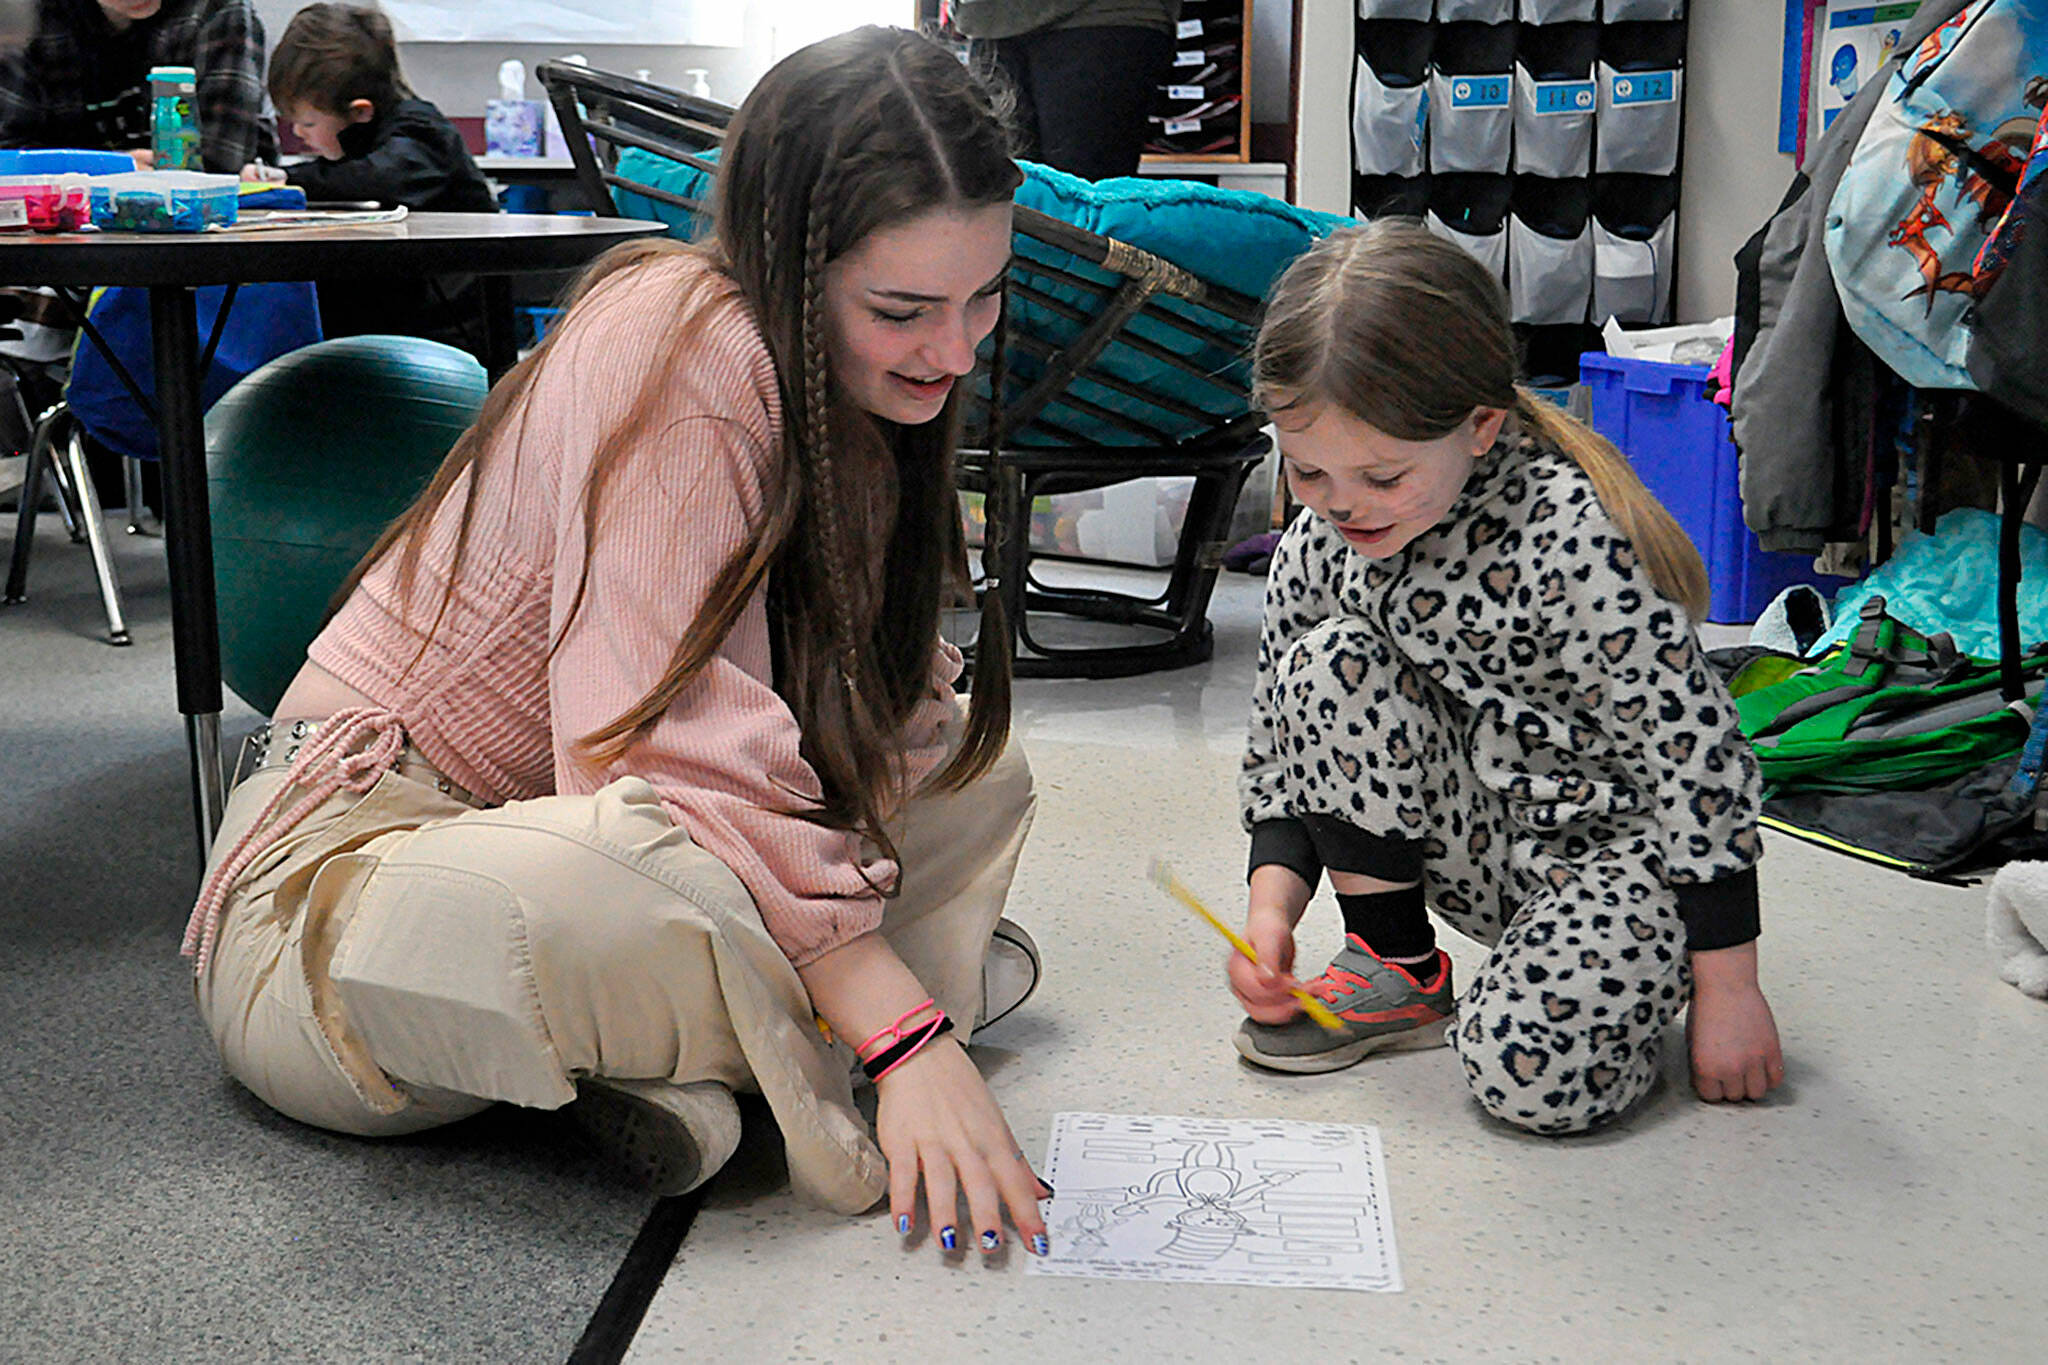 Sequim Gazette photo by Matthew Nash/ Eighth grader Ava Shinkle works with first grader Mavery Abken on a Dr. Seuss-inspired word work sheet on March 2 in Dawn Downs’ classroom at Greywolf Elementary. Sequim Middle School students traveled in the afternoon to read, draw and work with Greywolf students.